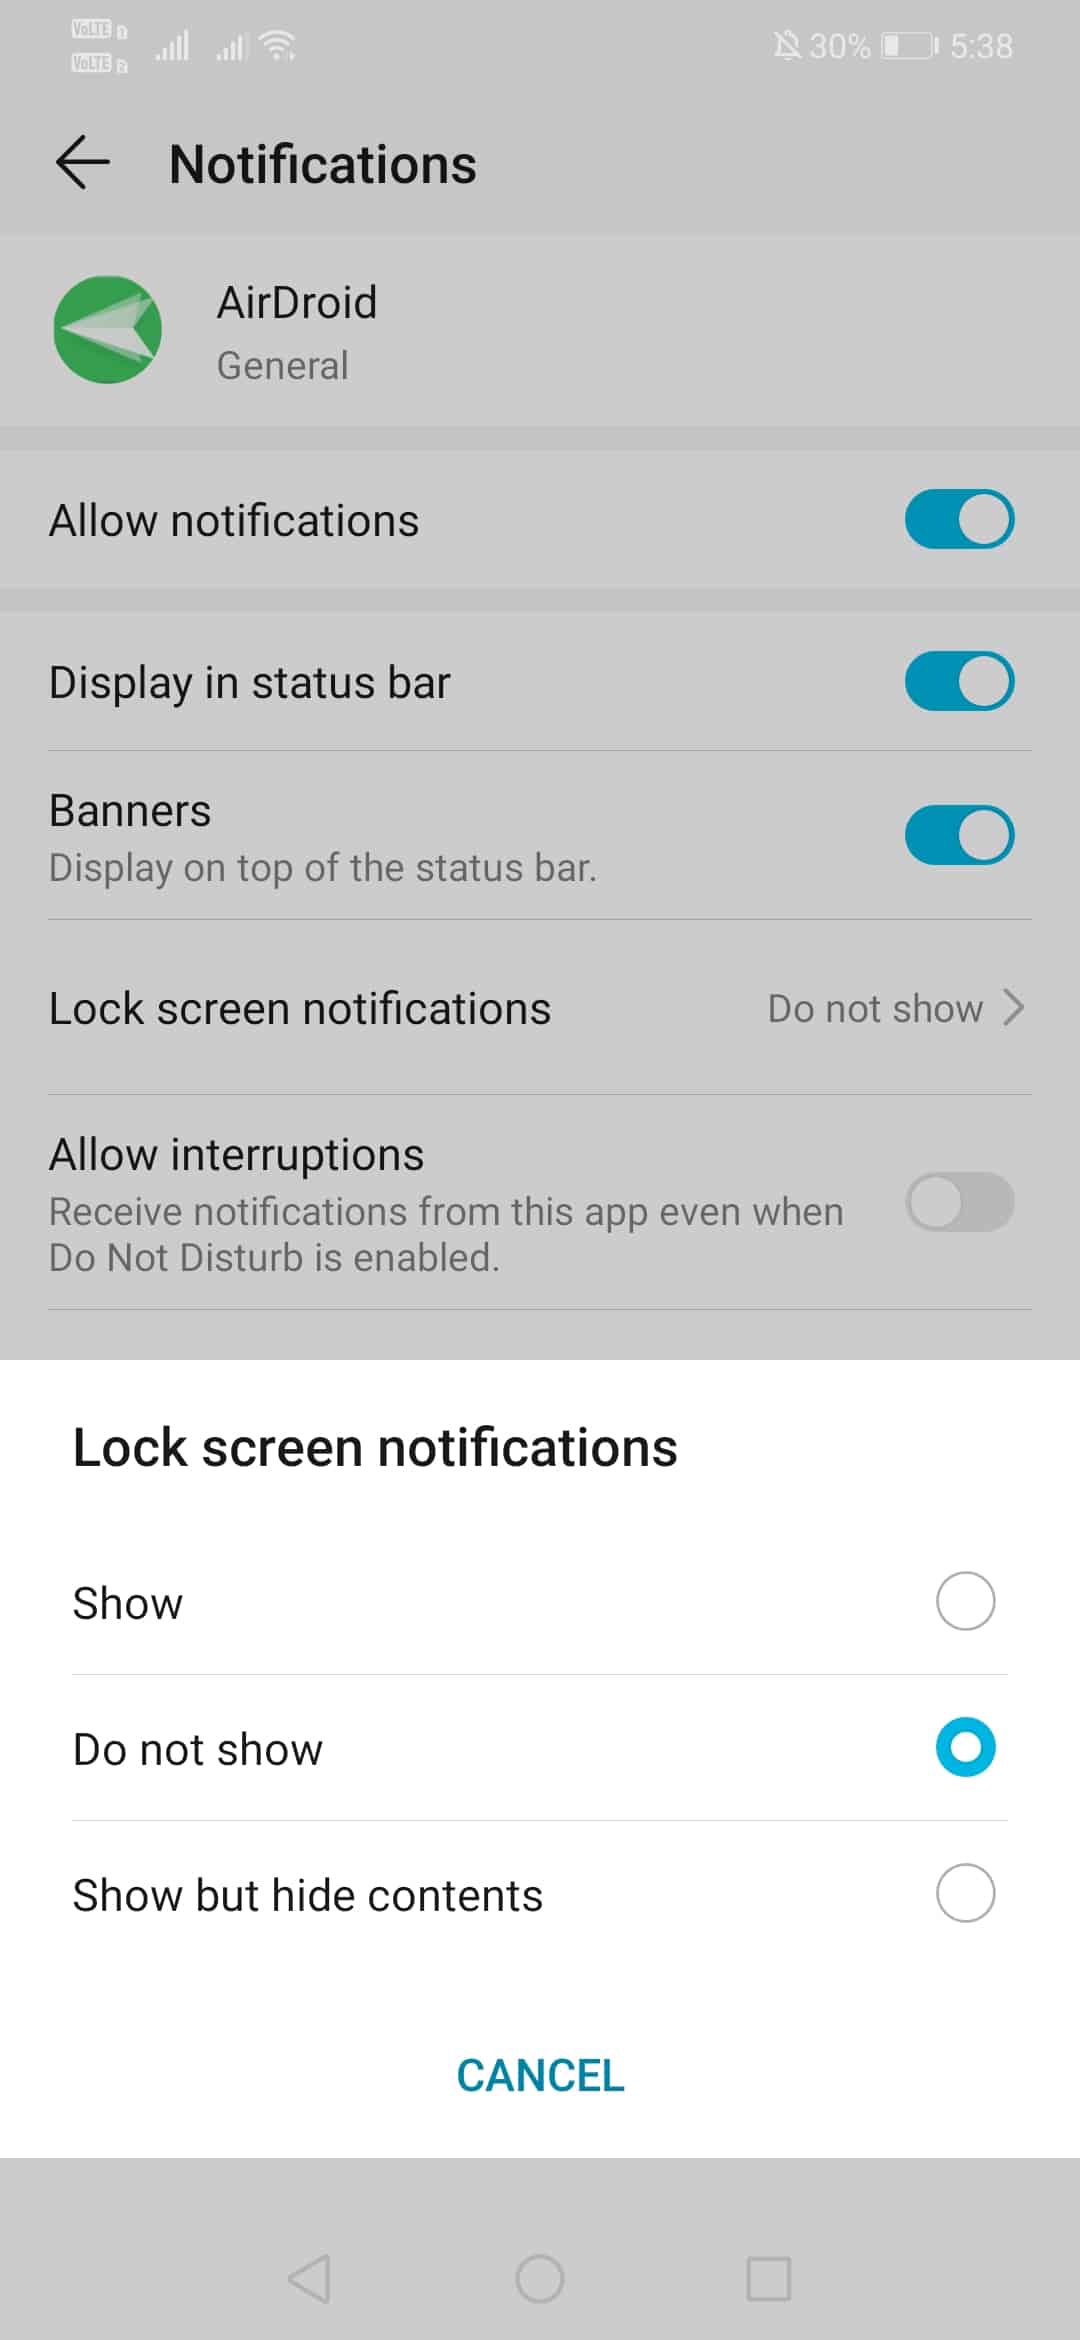 Disable Notifications On Android’s Lock Screen